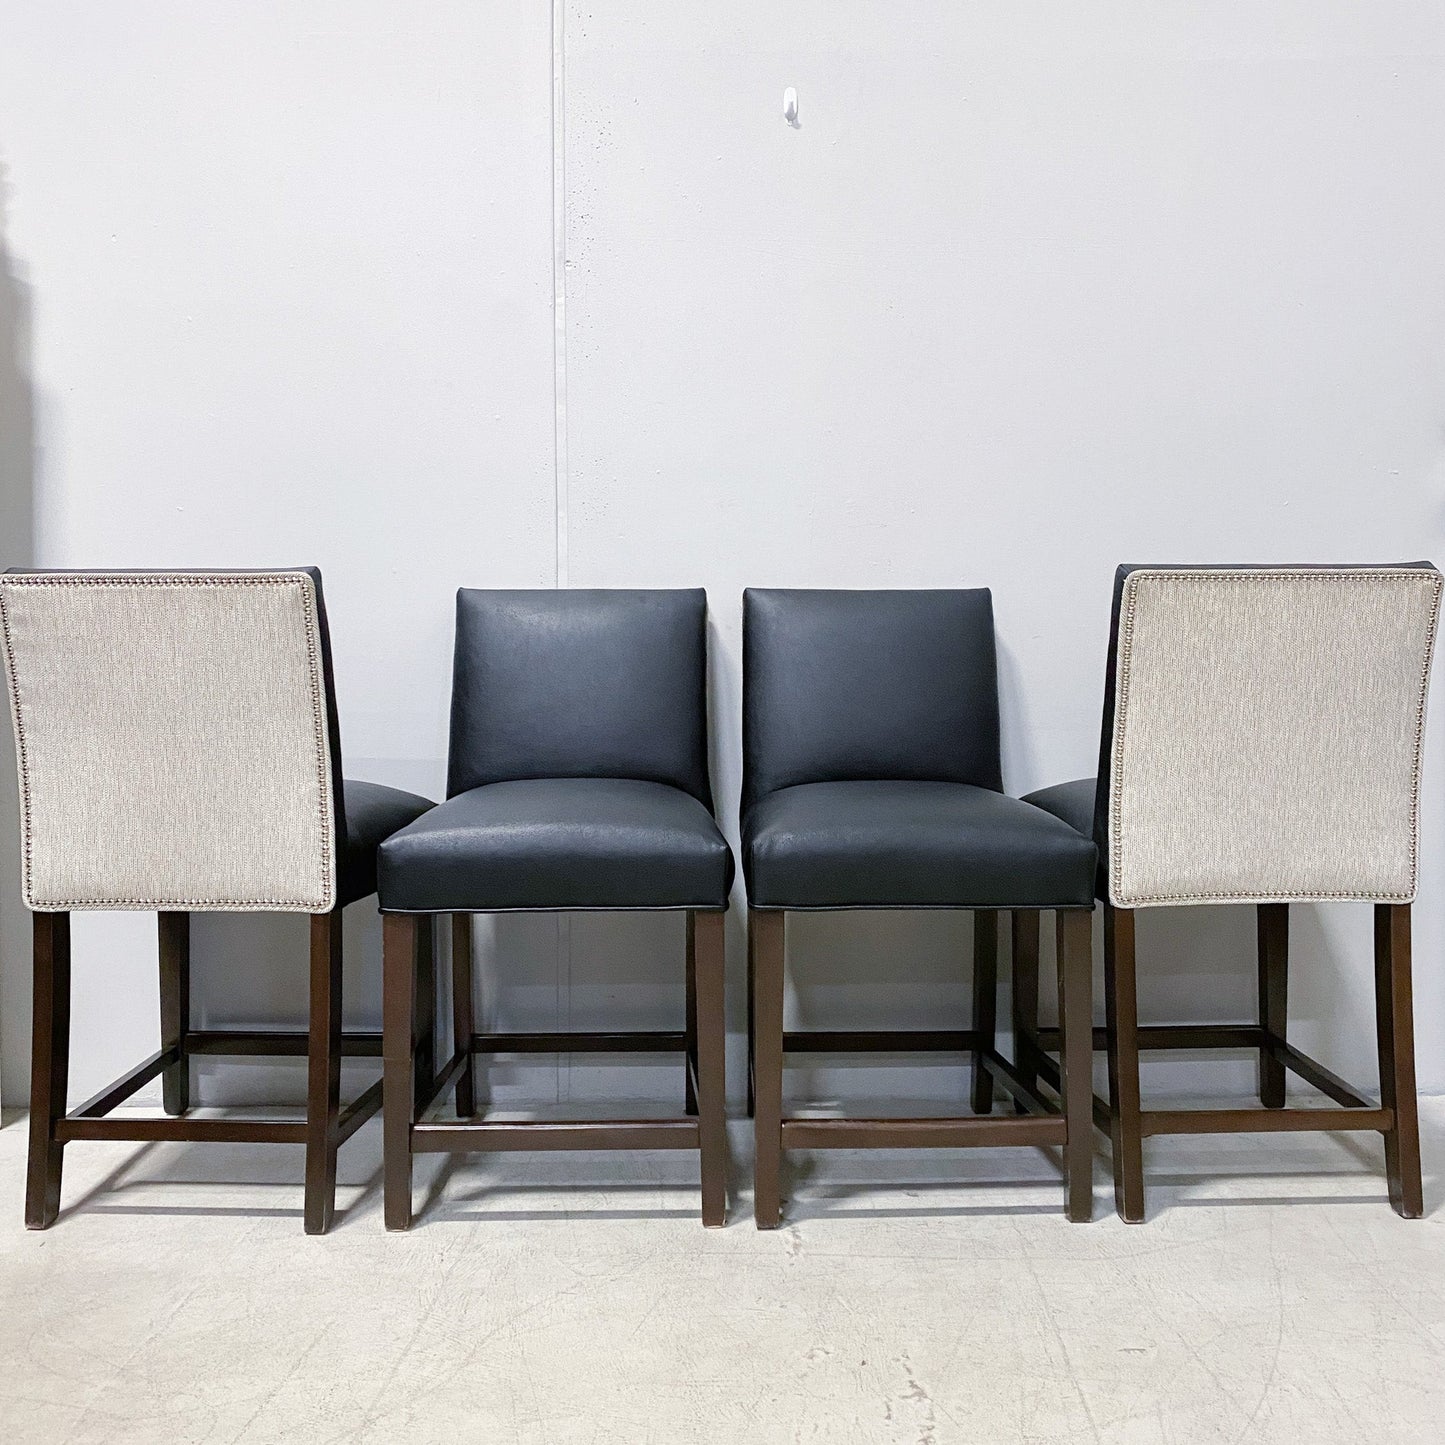 Counter-Height Dining Chairs (Set of 4)